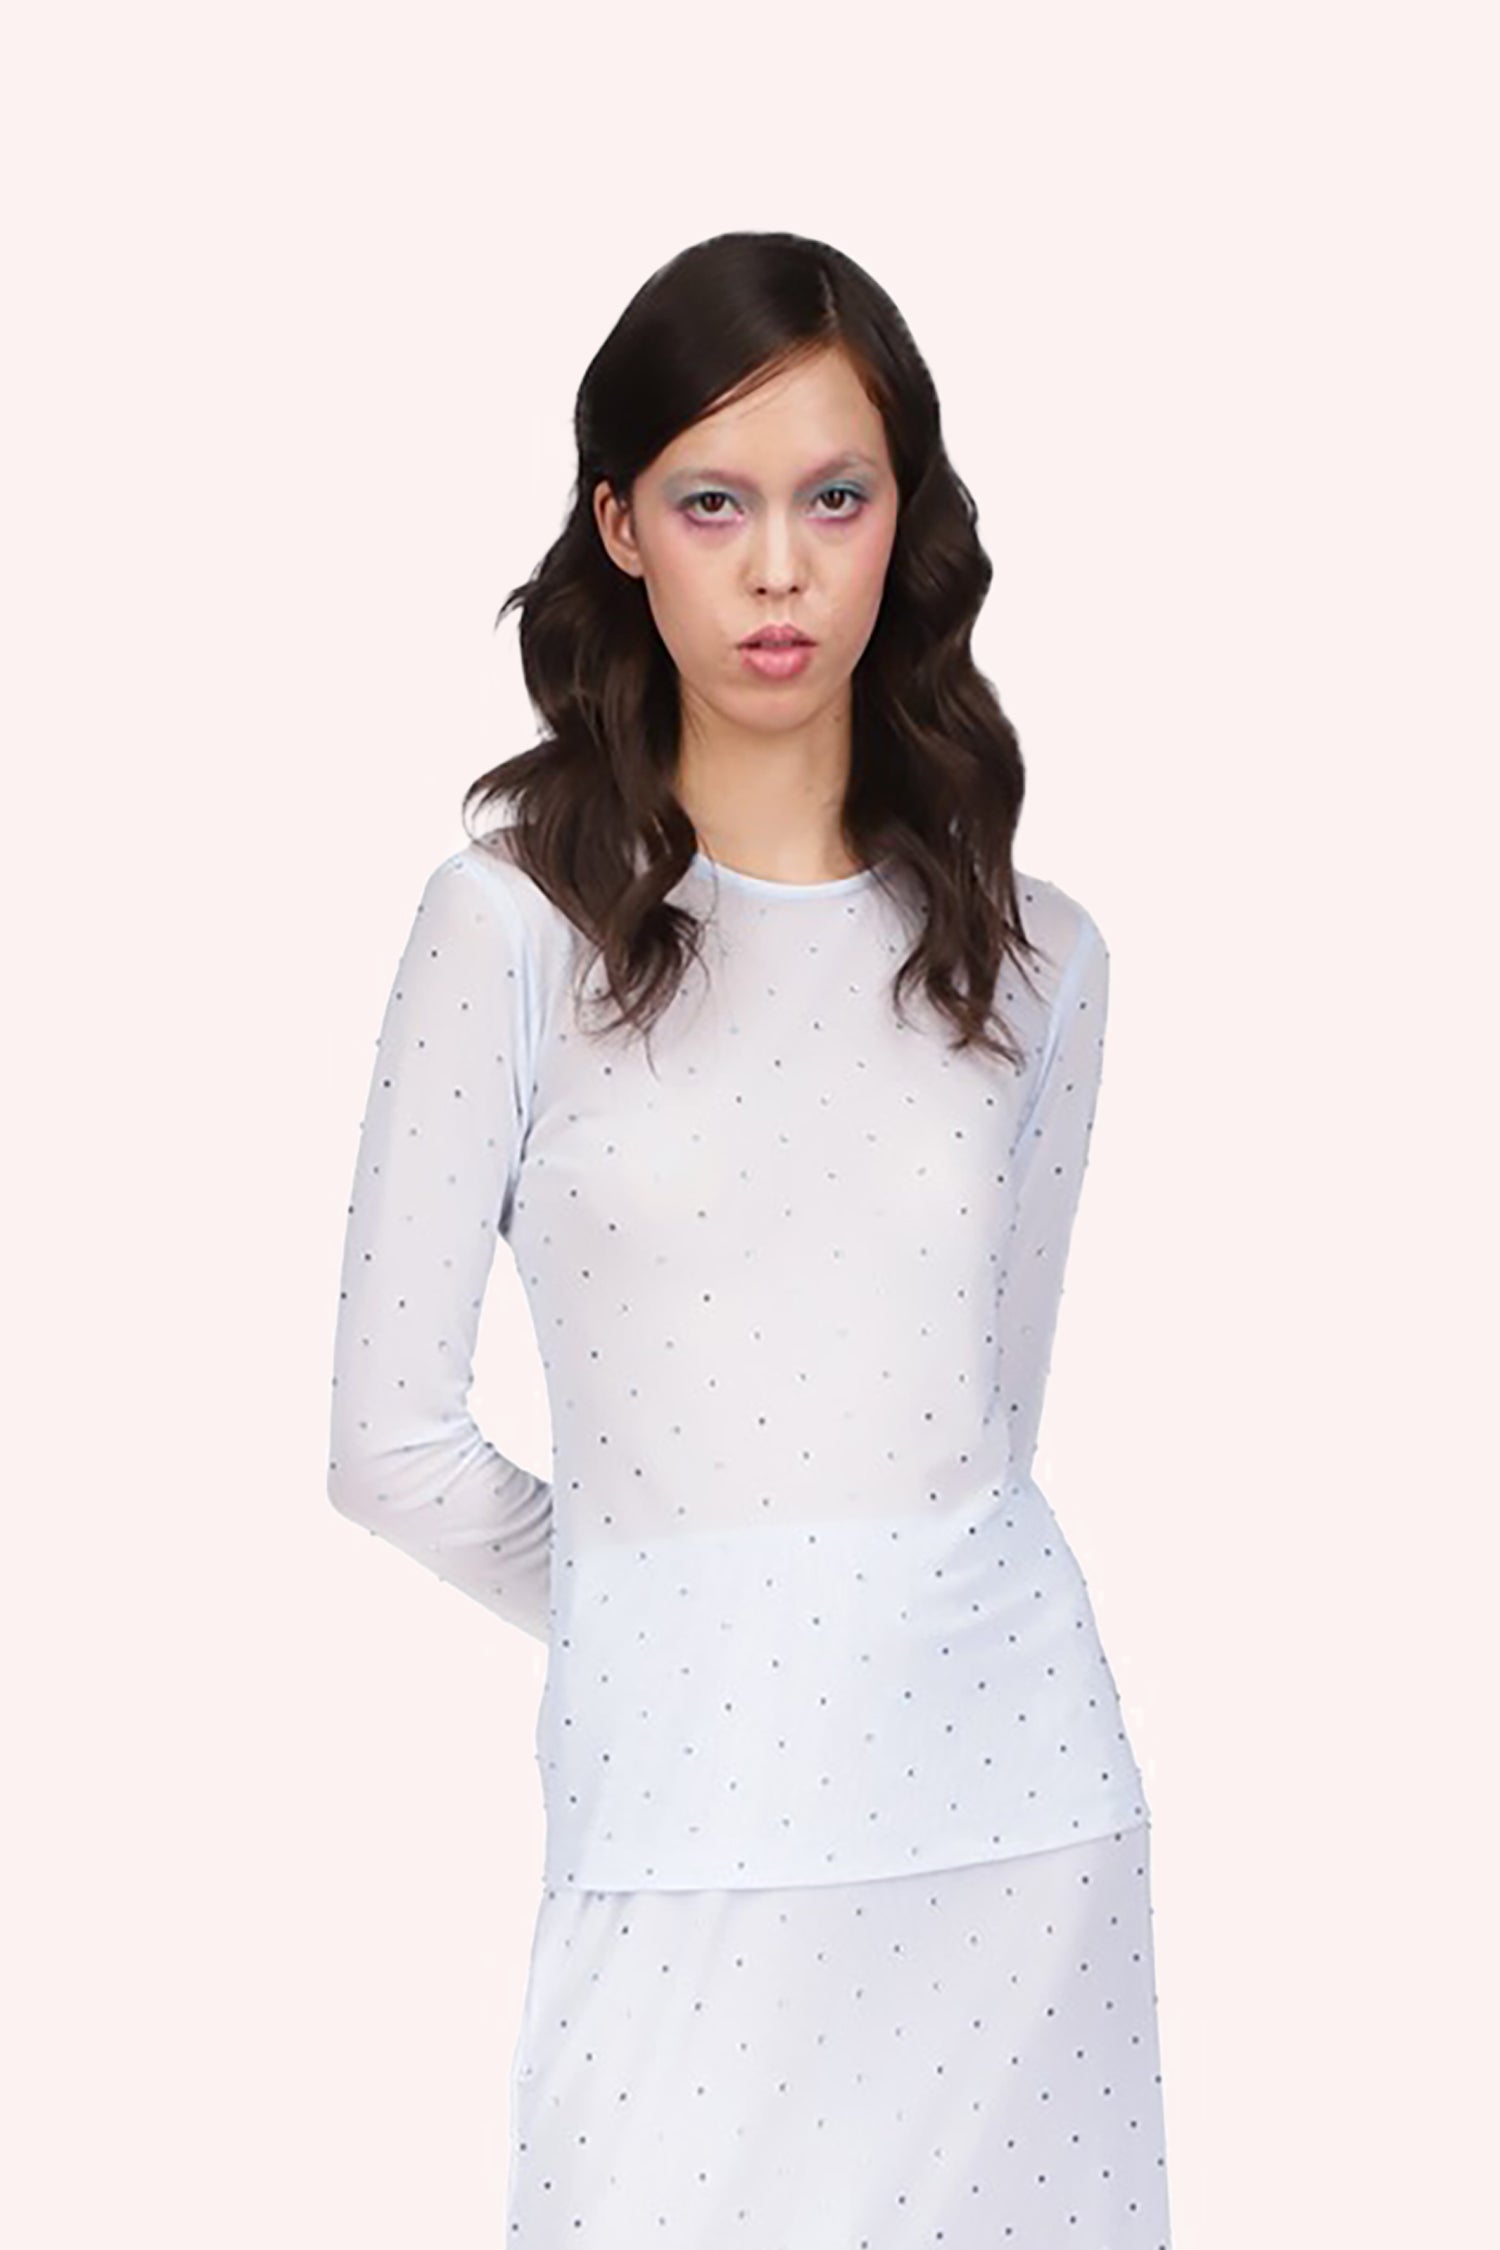 Top Powder Blue, hips long, very light blue with small dark dots, neckline collar, long sleeves